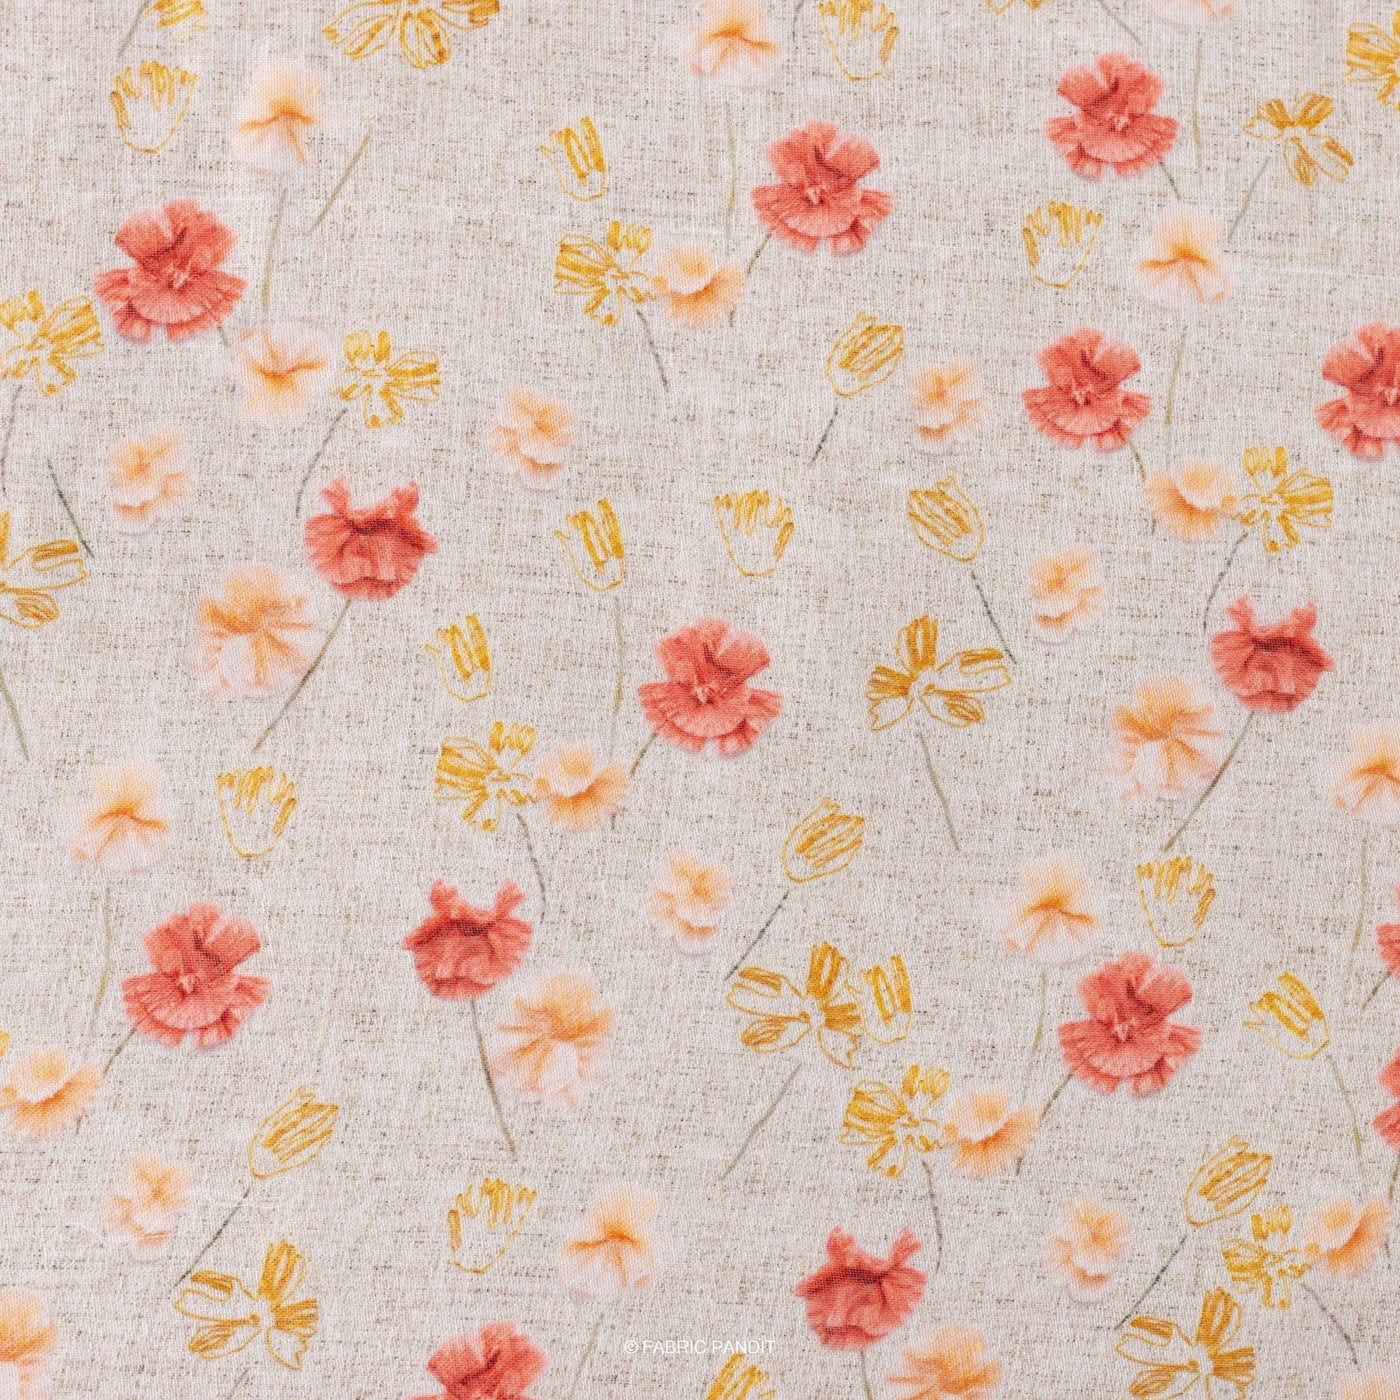 Fabric Pandit Cut Piece (Cut Piece) Beige and Peach Flowers & Buds Digital Printed Linen Neps Fabric (Width 44 Inches)